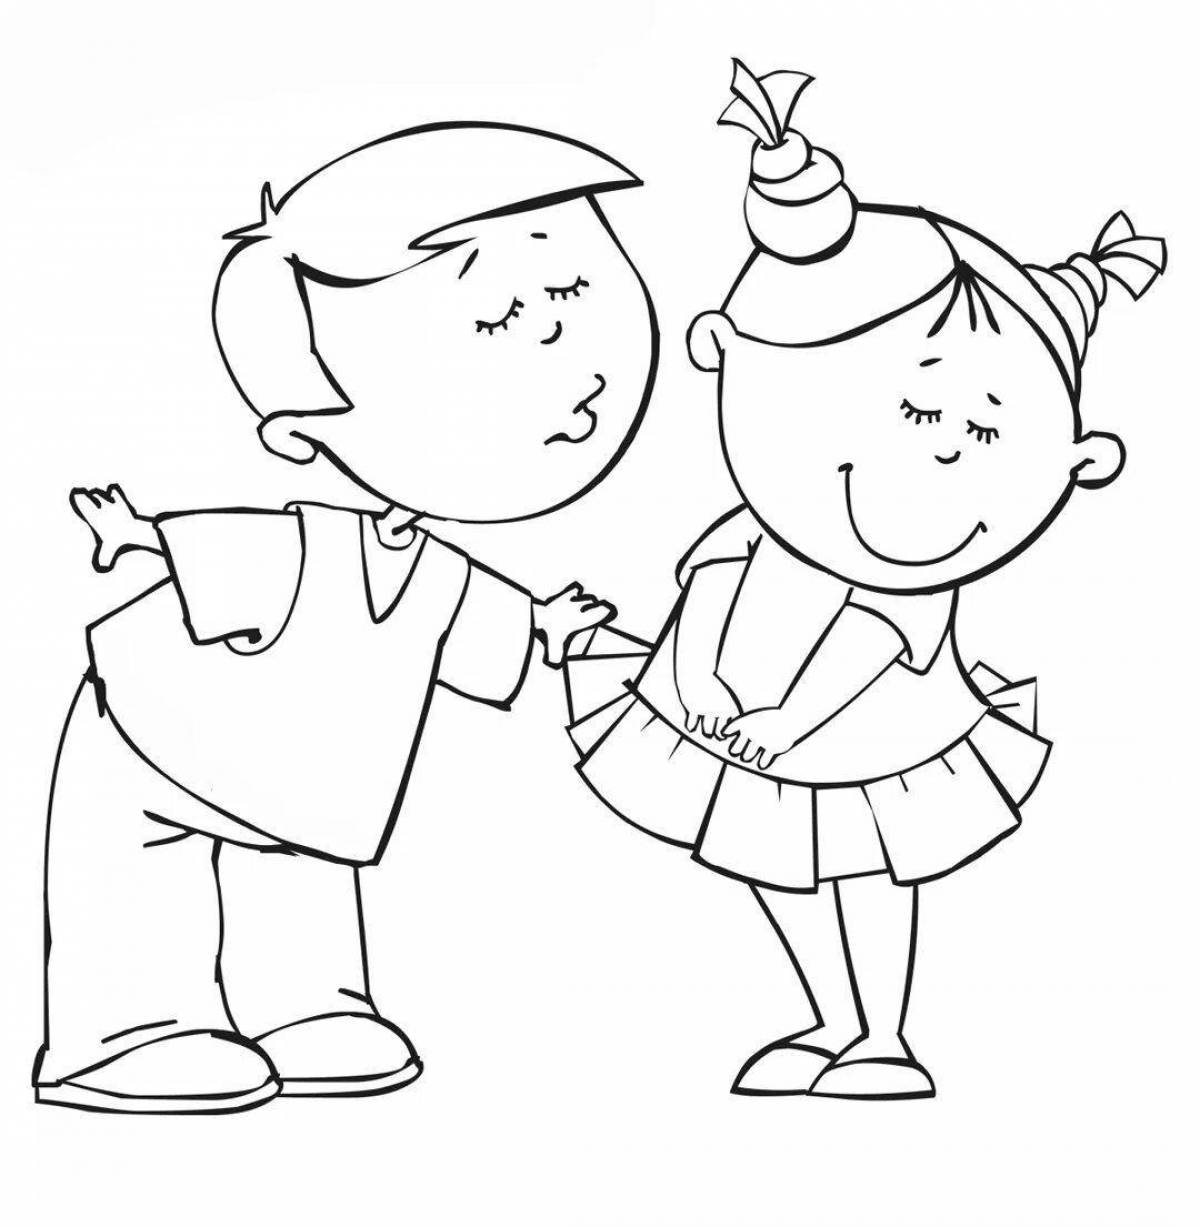 Adorable coloring pages for boys and girls